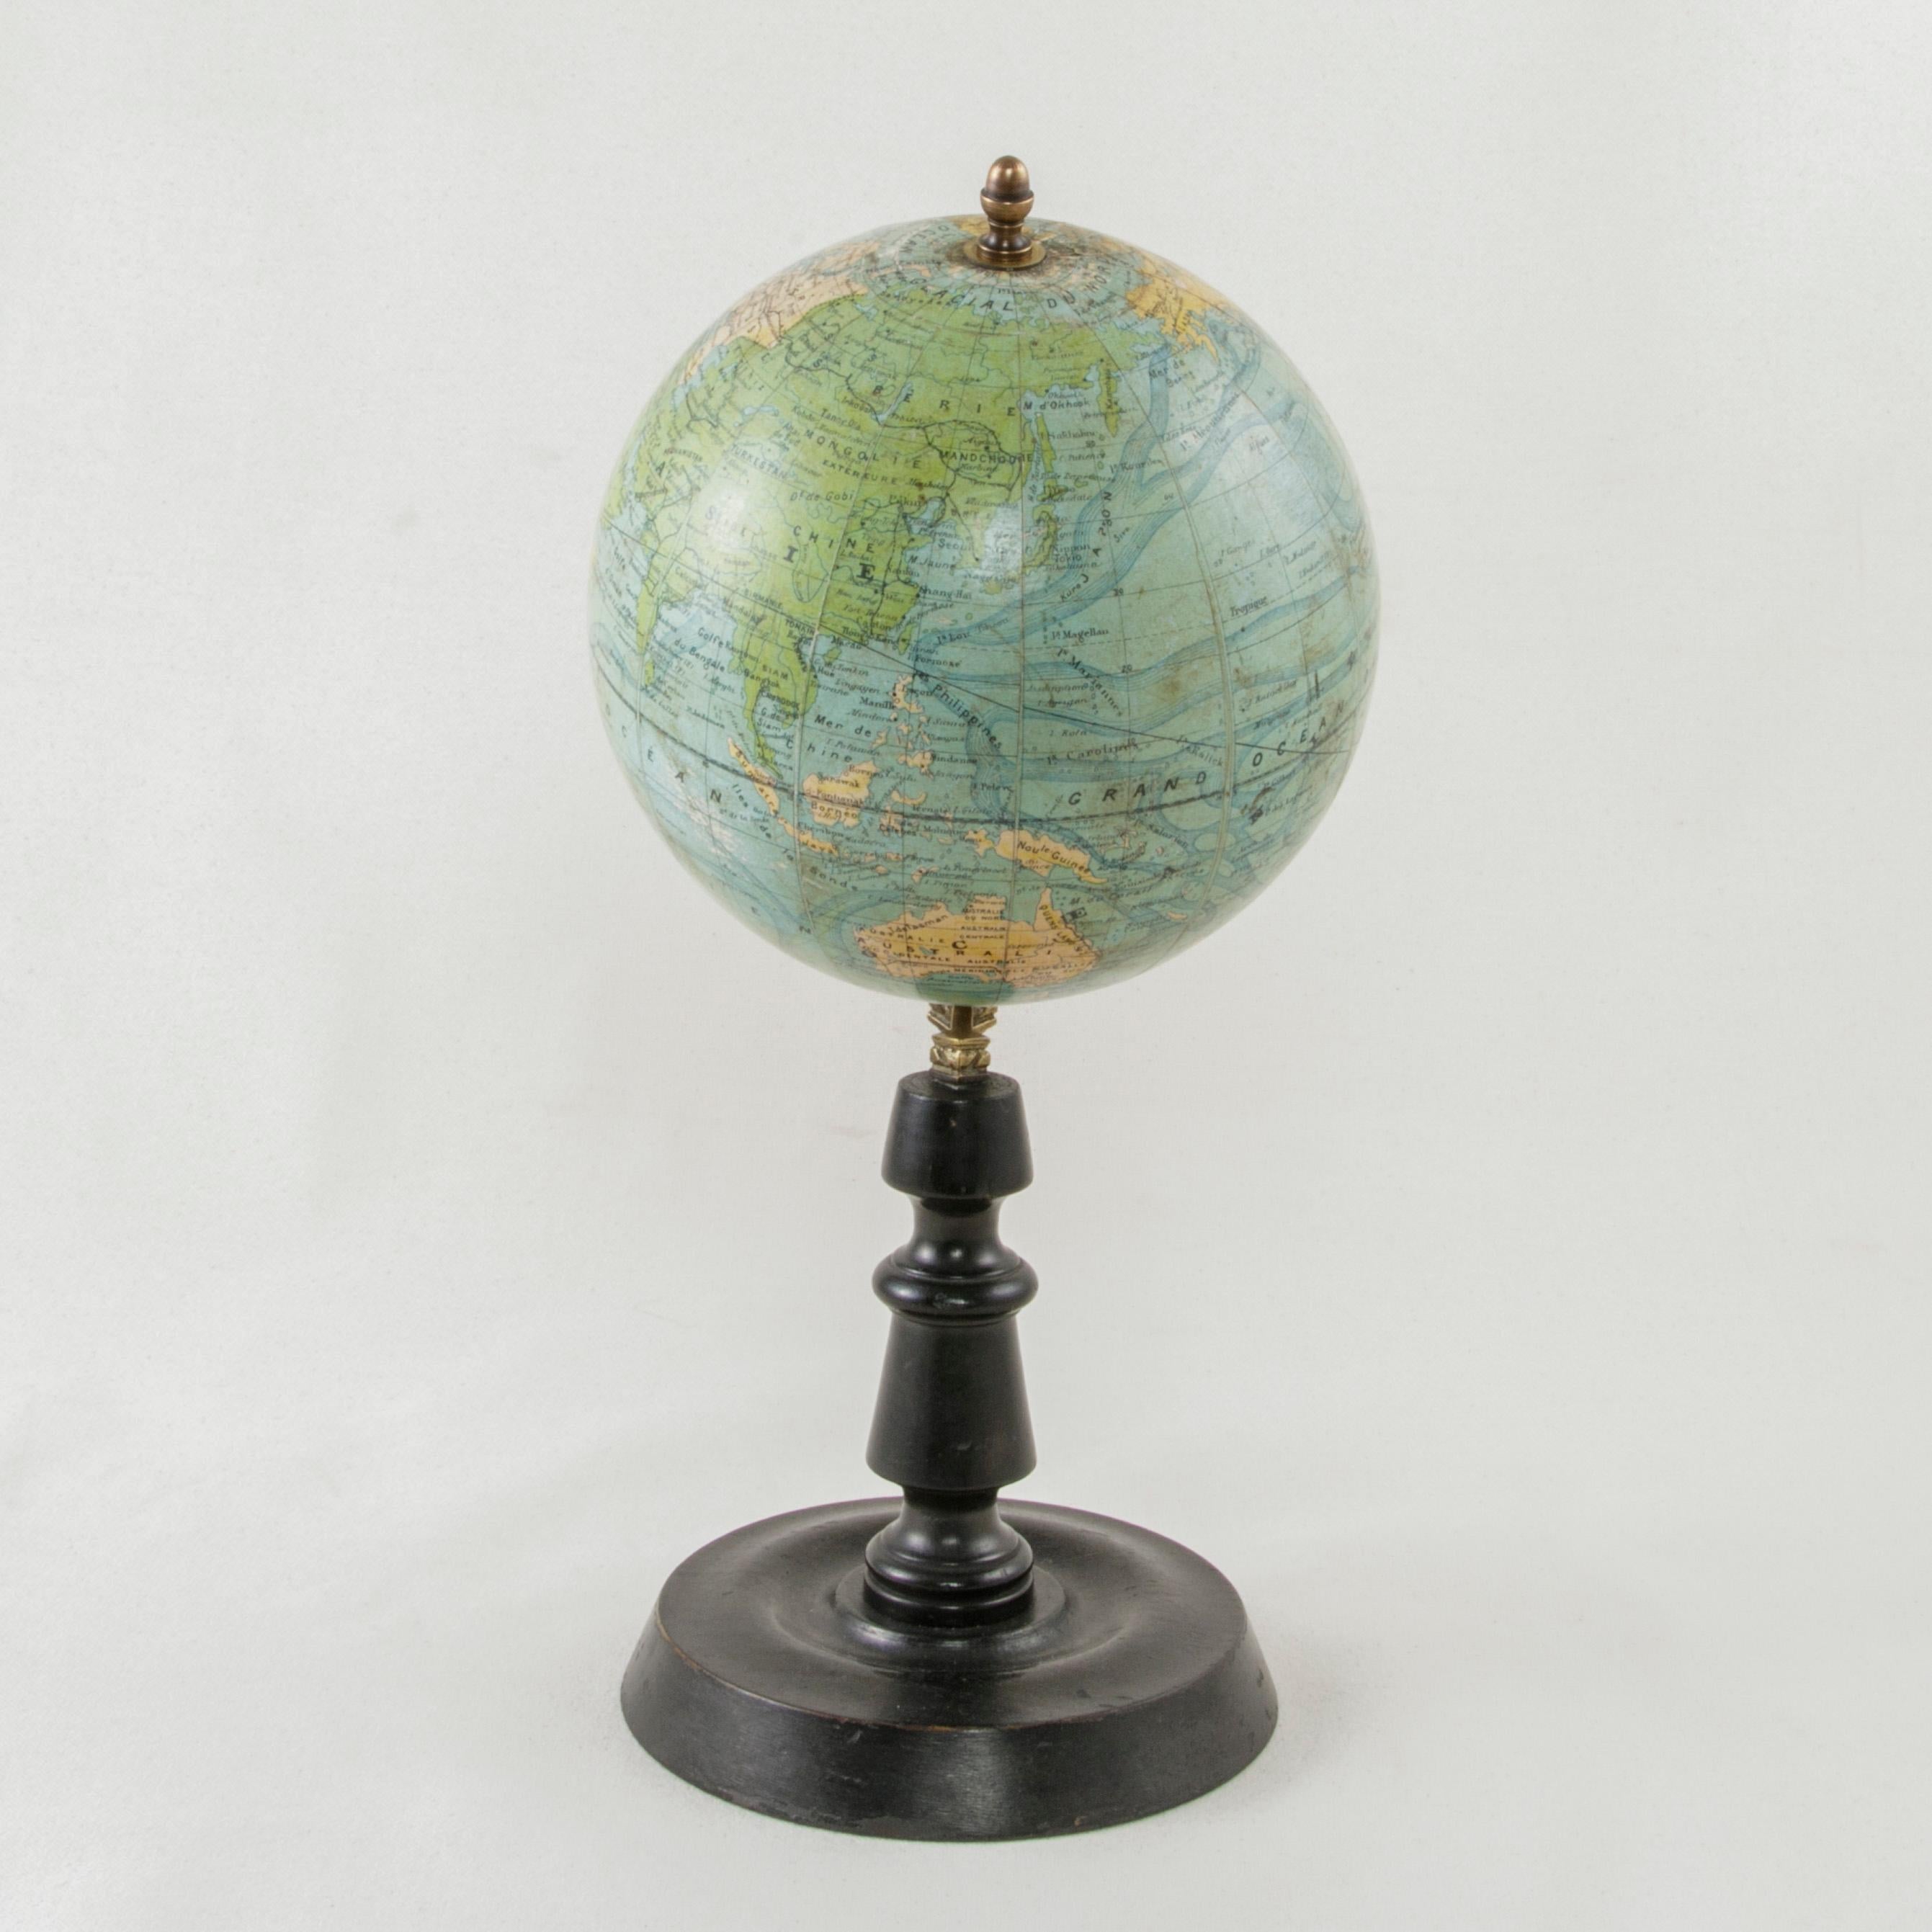 This papier mâché terrestrial globe from the early 20th century was edited by the renowned French cartographer J. Forest and features not only location names, but also ocean currents and train line routes of the period. A piece of world history, the